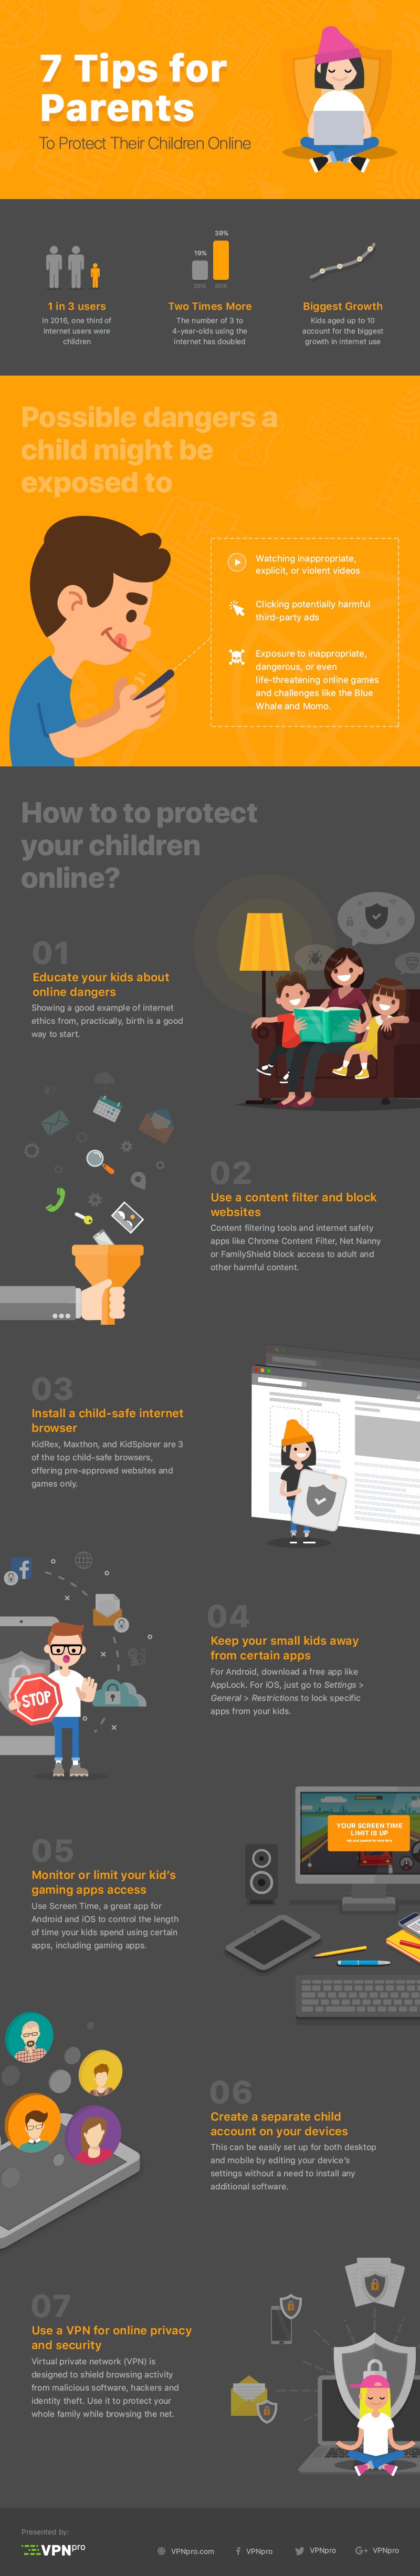 6 Internet Safety Tips for Kids (and Their Parents)